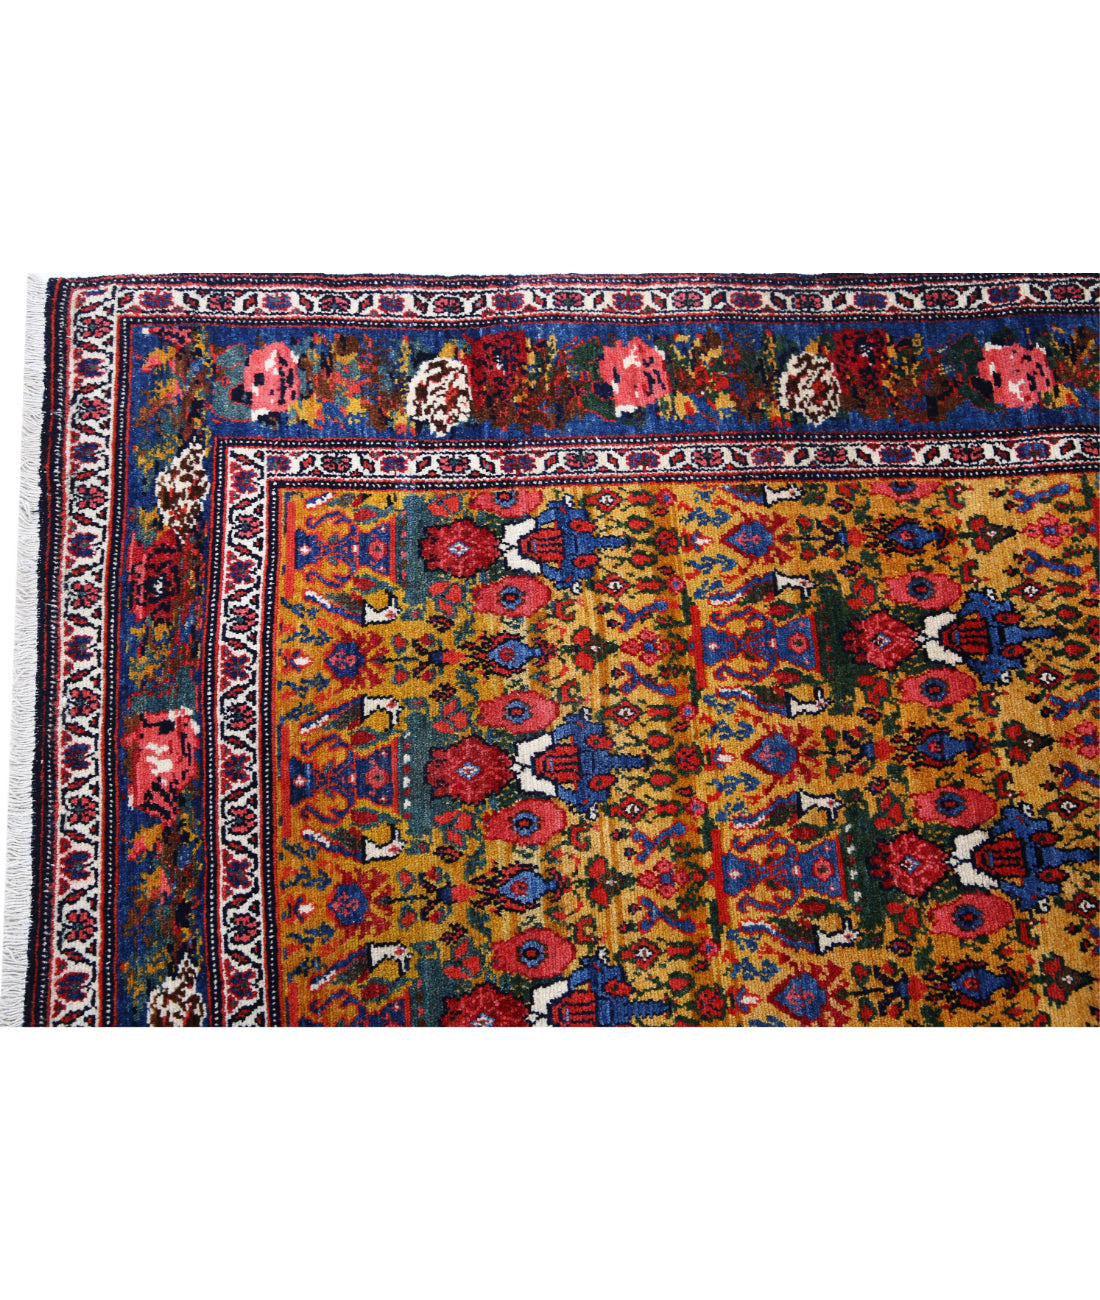 Hand Knotted Antique Persian Malayer Wool Rug - 5'4'' x 7'10'' 5'4'' x 7'10'' (160 X 235) / Gold / Blue